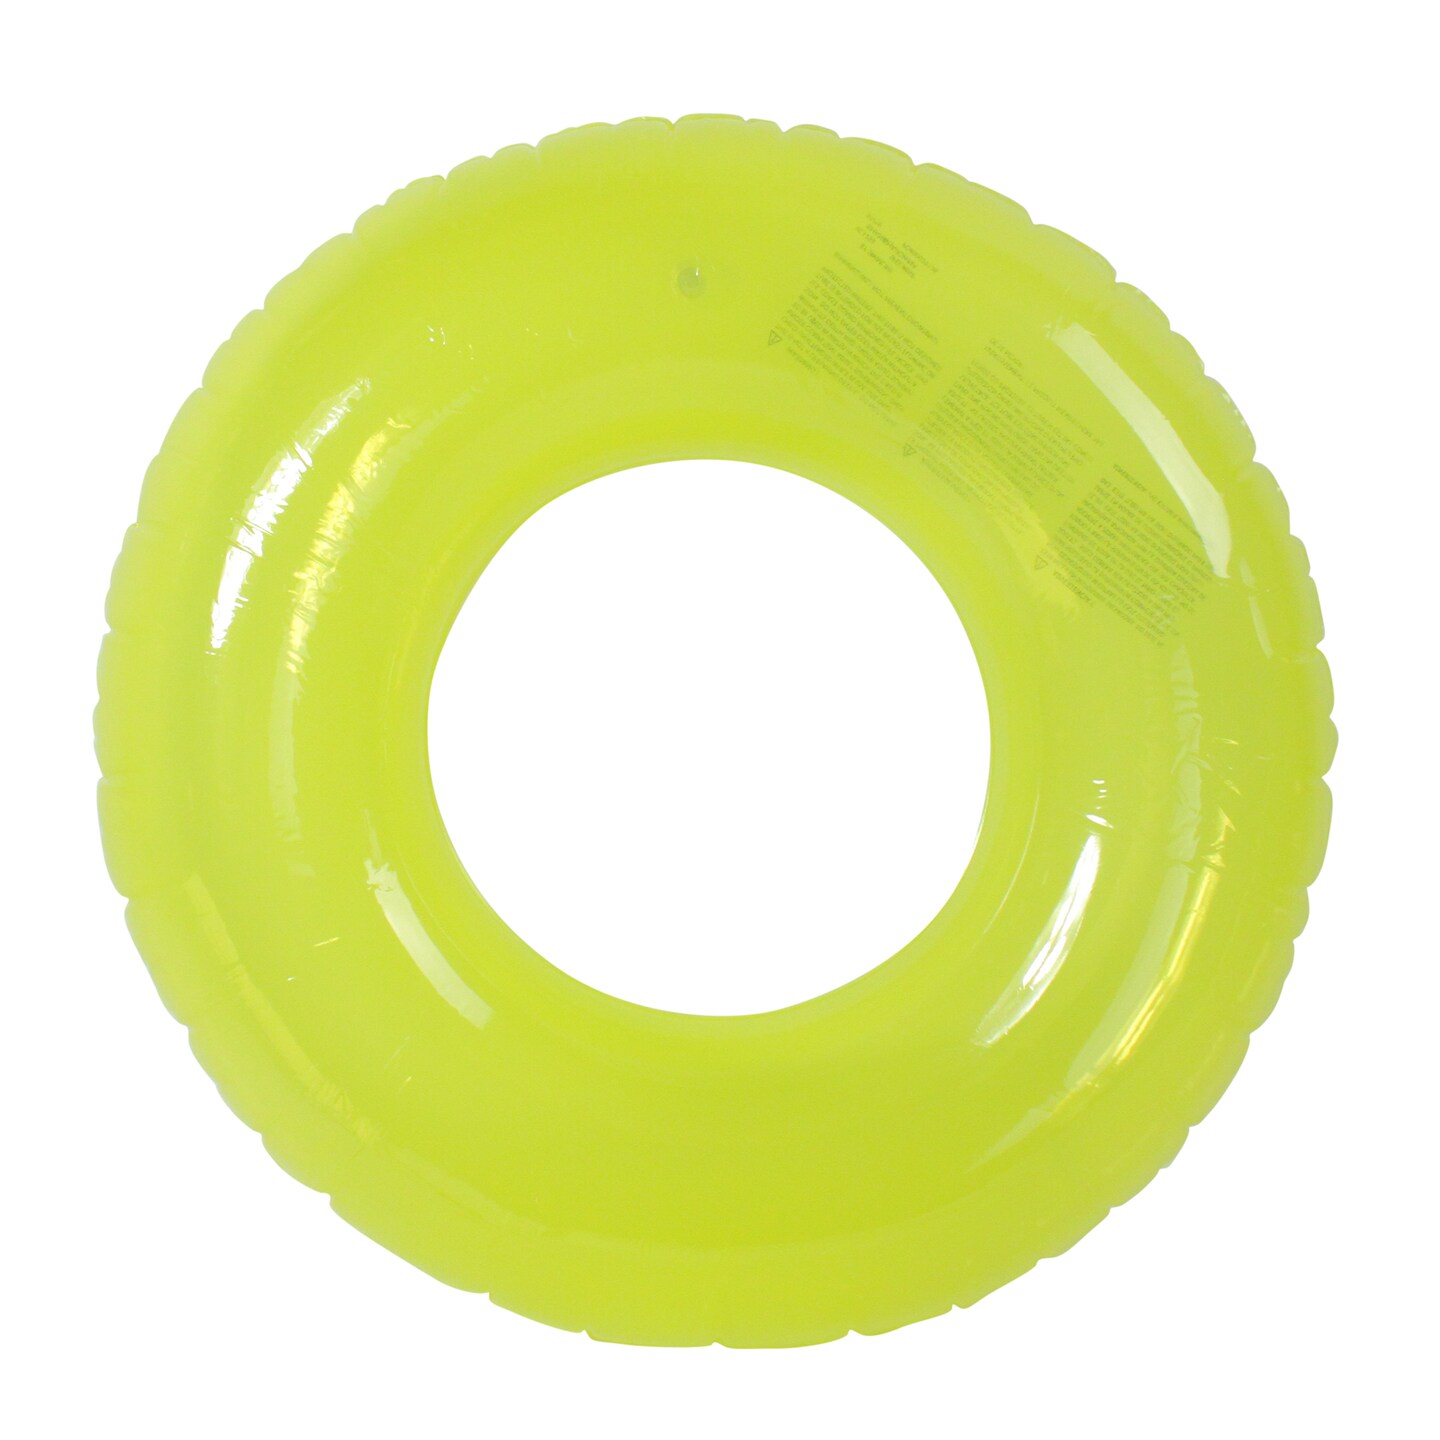 Swim Central 30-Inch Inflatable Bright Yellow Swim Ring Tube Pool Float ...